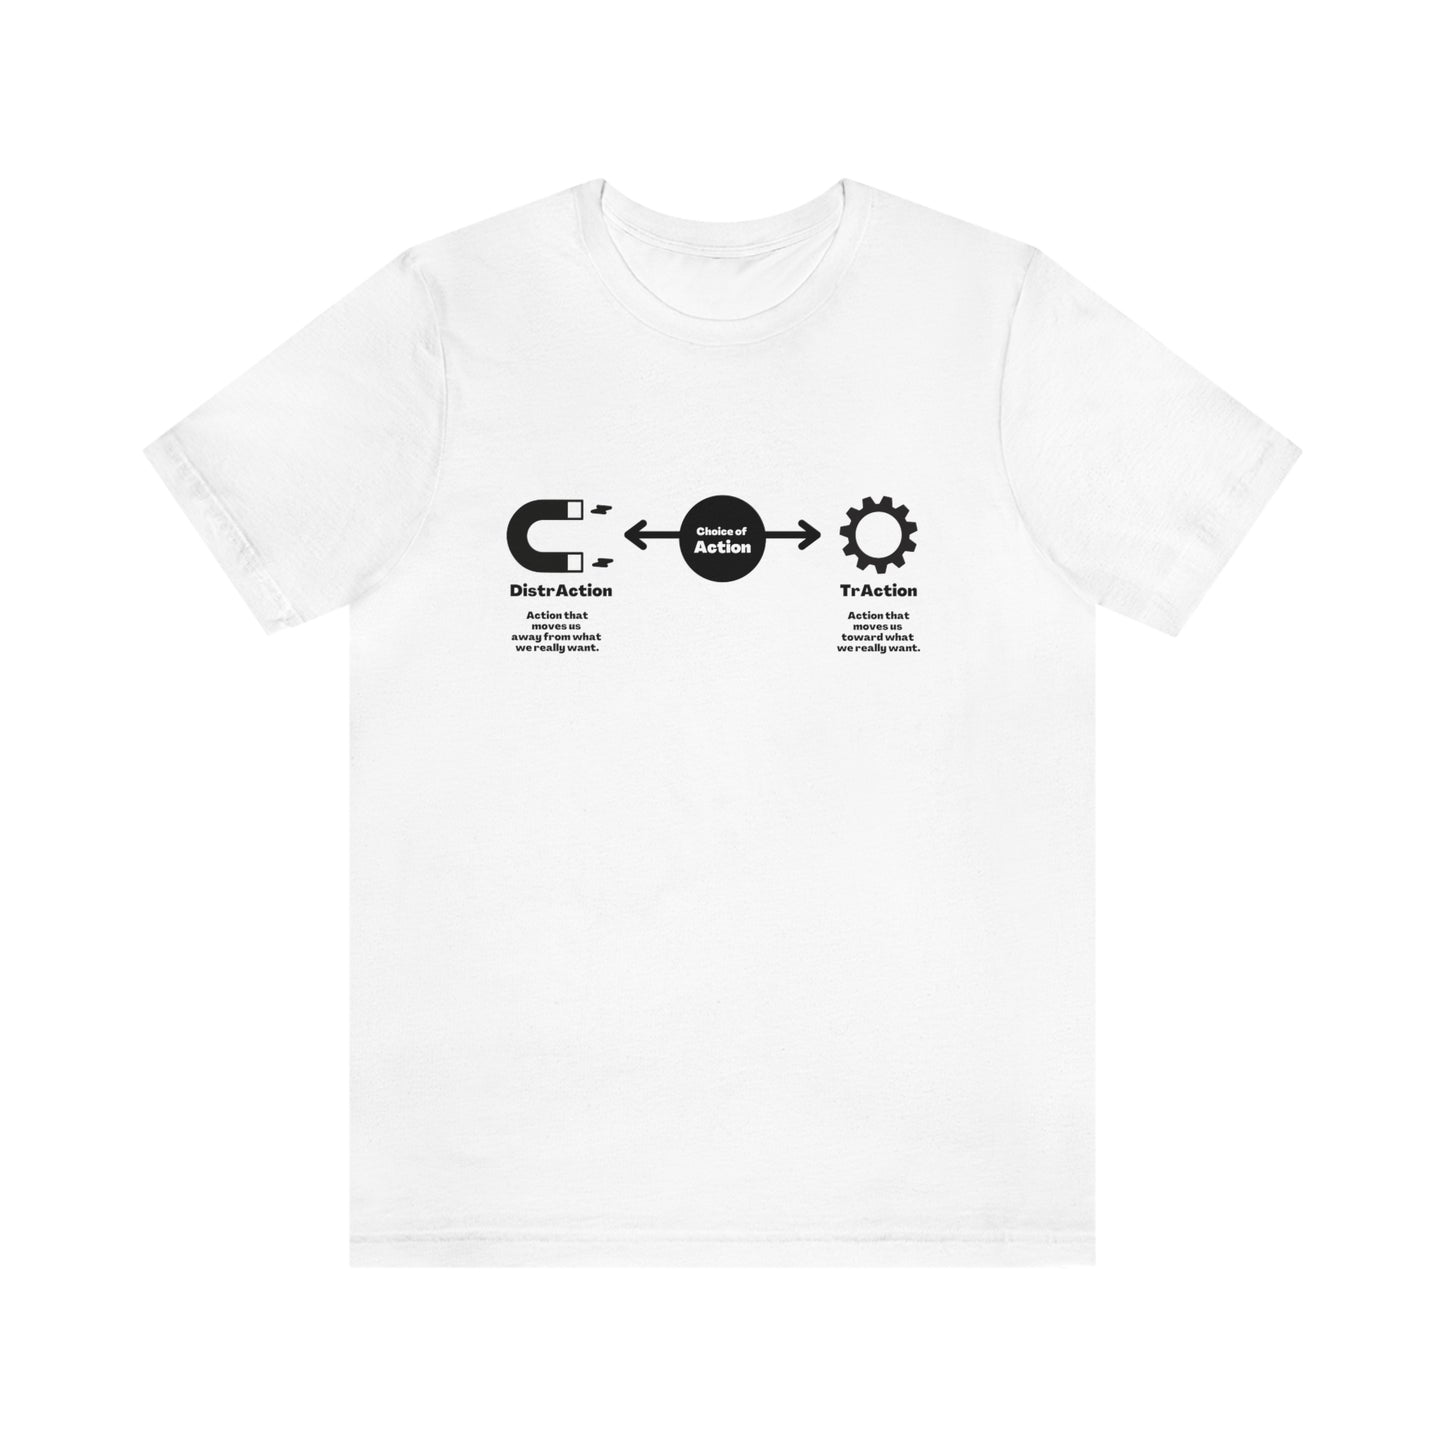 Choice of Actions Motivational Tee Tshirts, DEIB Statement Tees